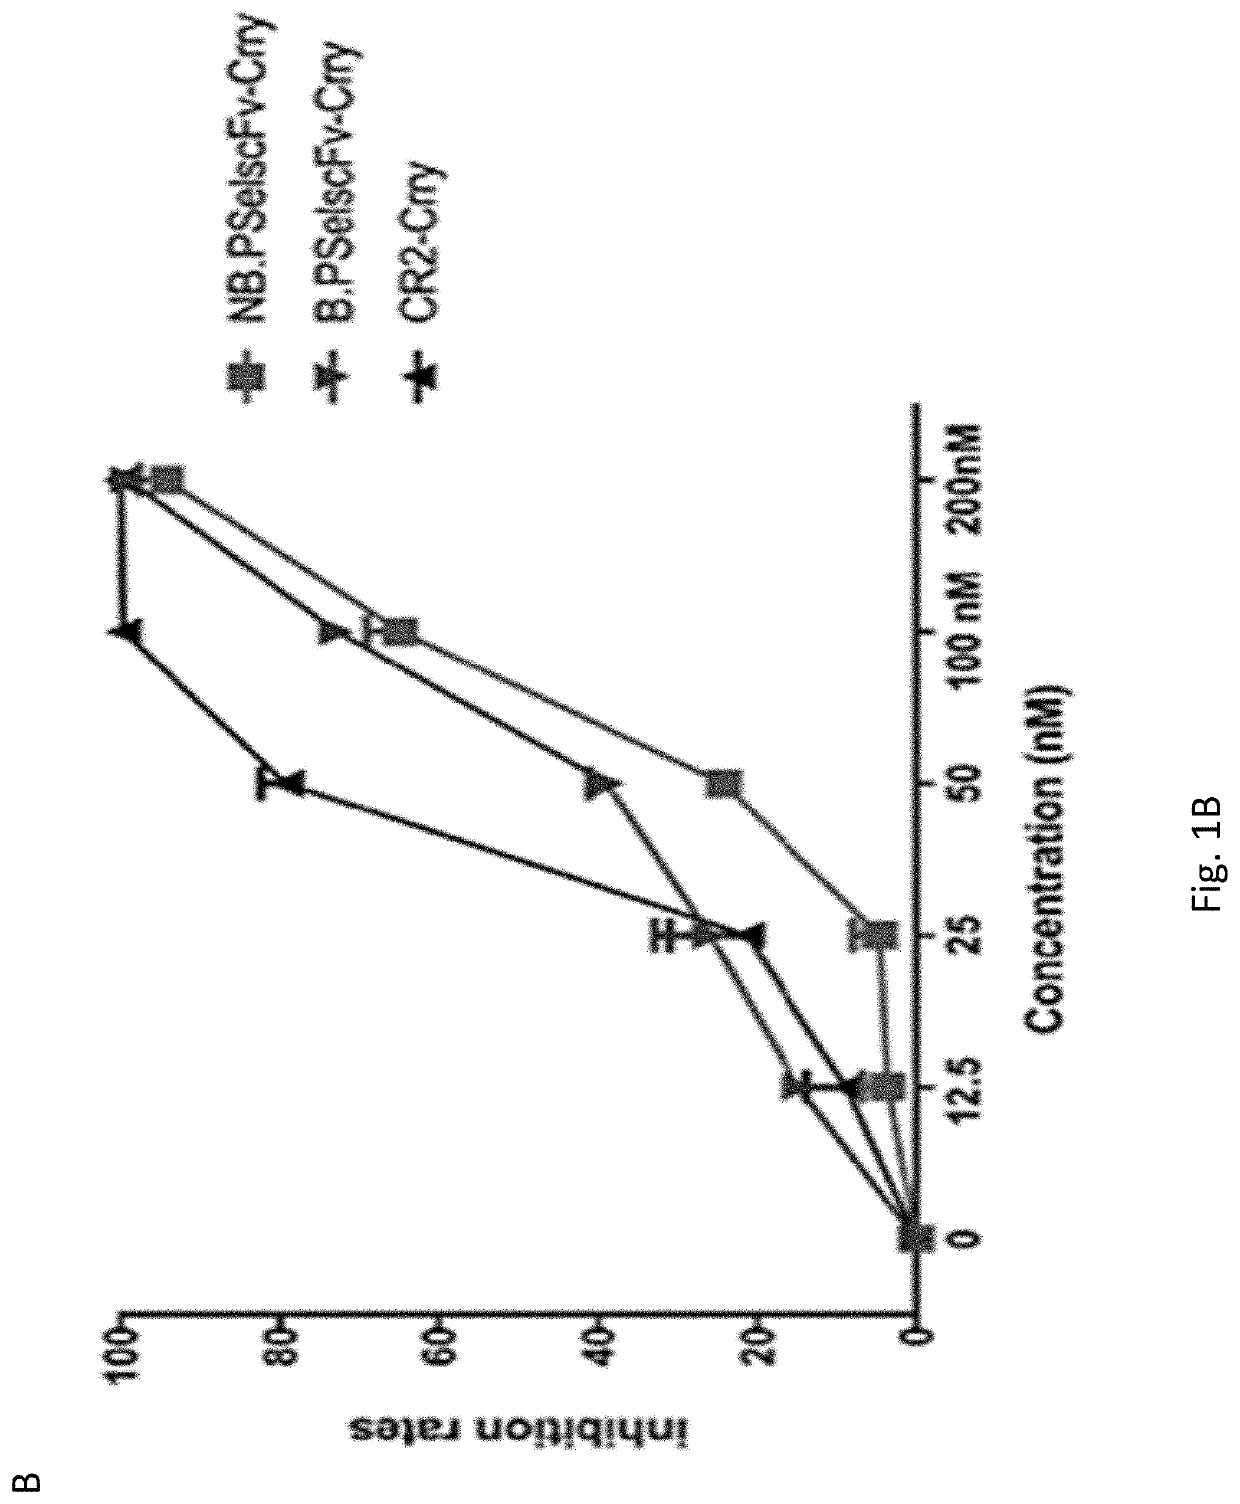 Recombinant Fusion Proteins Targeting P-selectin, and Methods of Use Thereof for Treating Diseases and Disorders